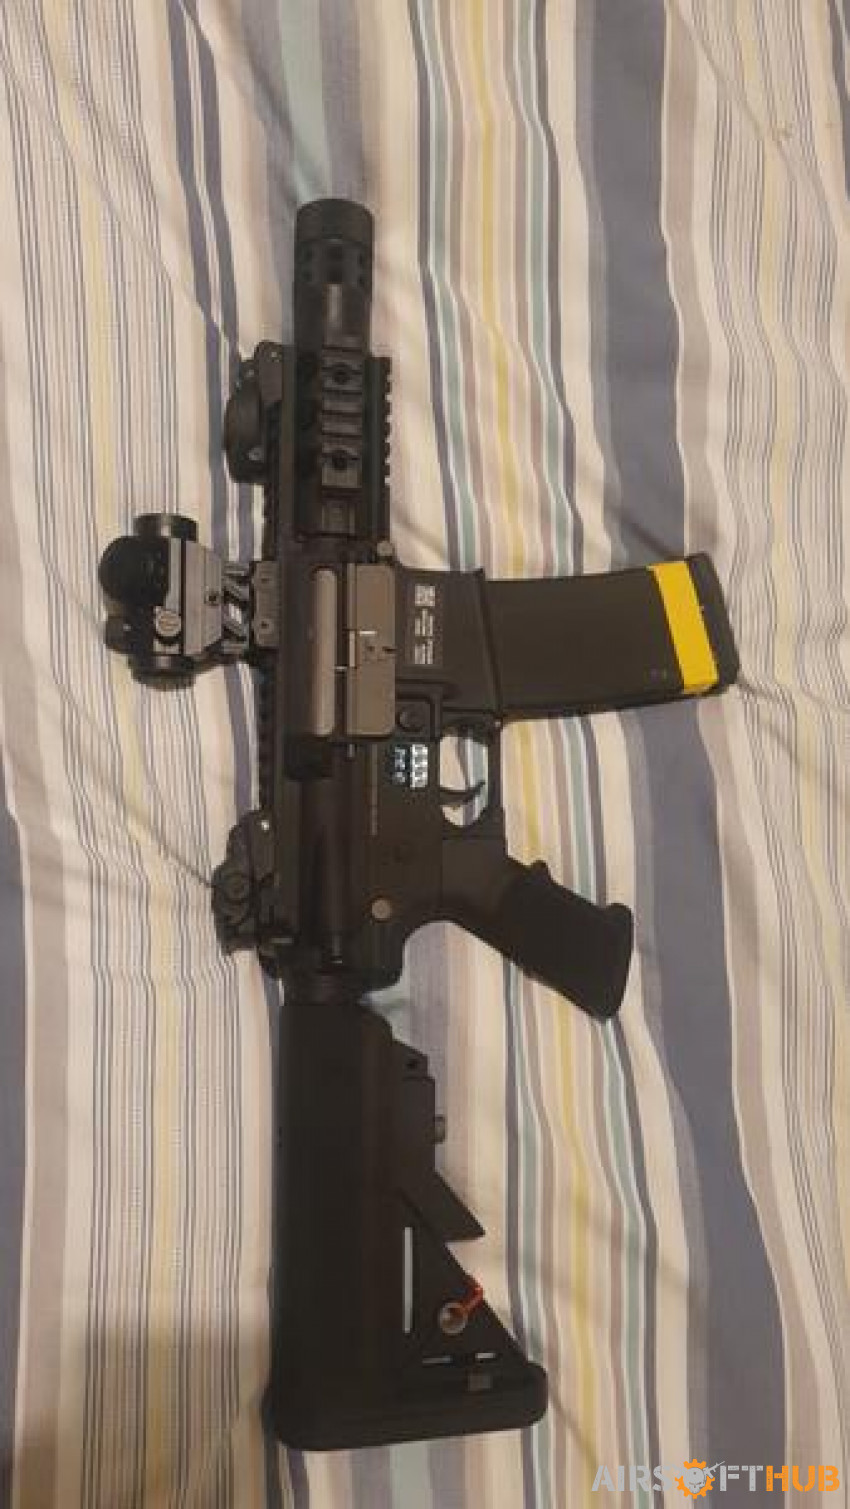 Specna arms mini m4 - Used airsoft equipment